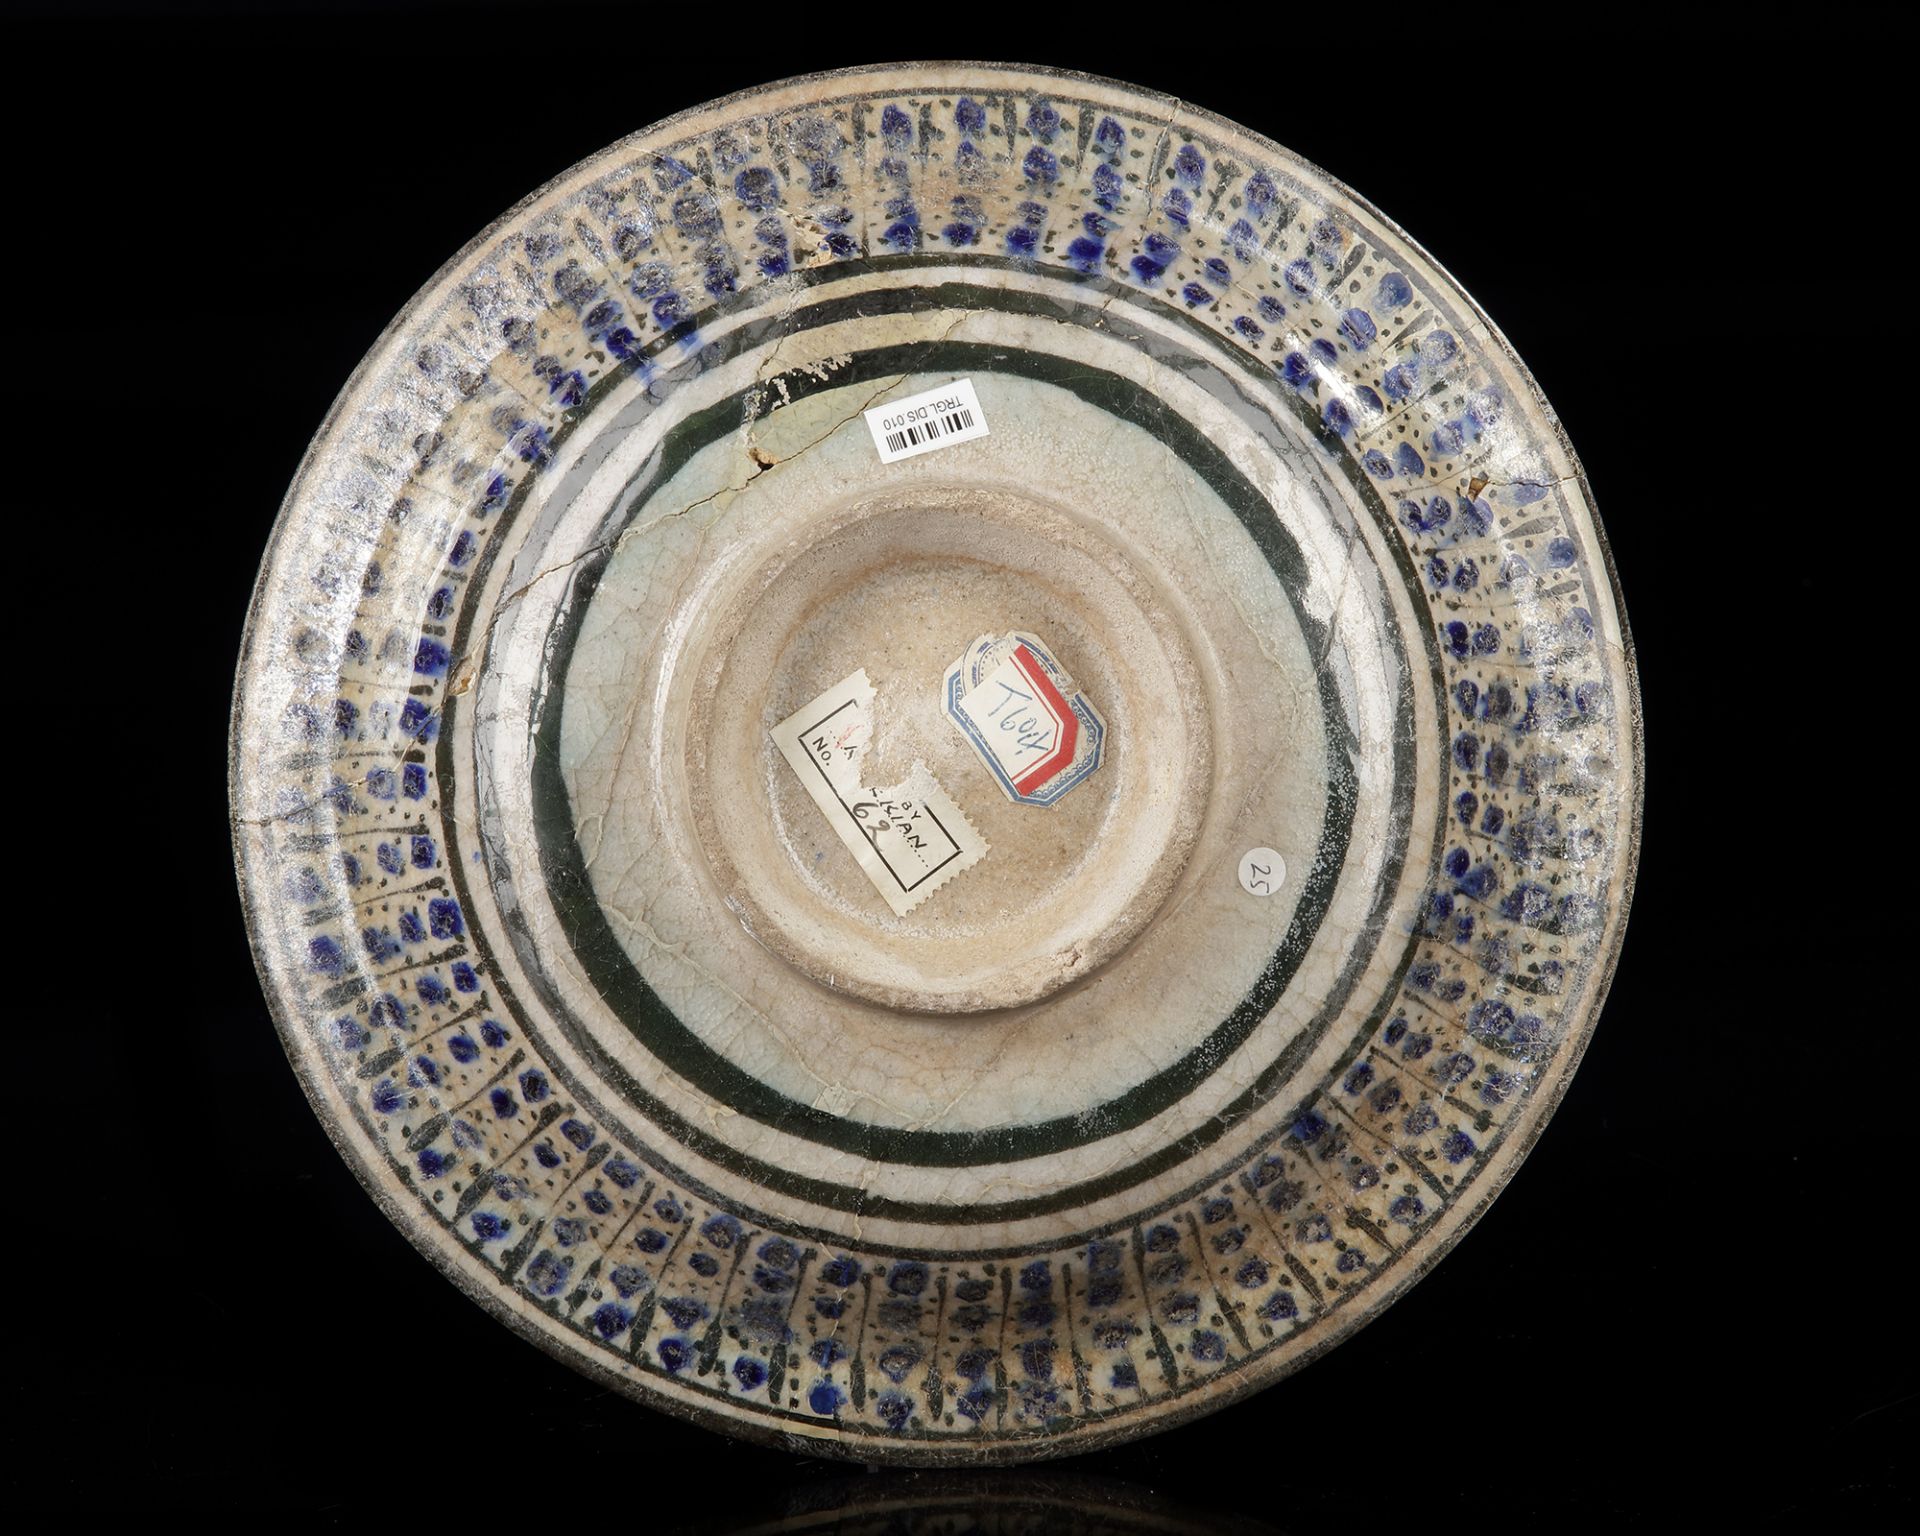 A SULTANABAD POTTERY DISH, NORTH PERSIA, LATE 13TH-EARLY 14TH CENTURY - Bild 4 aus 4